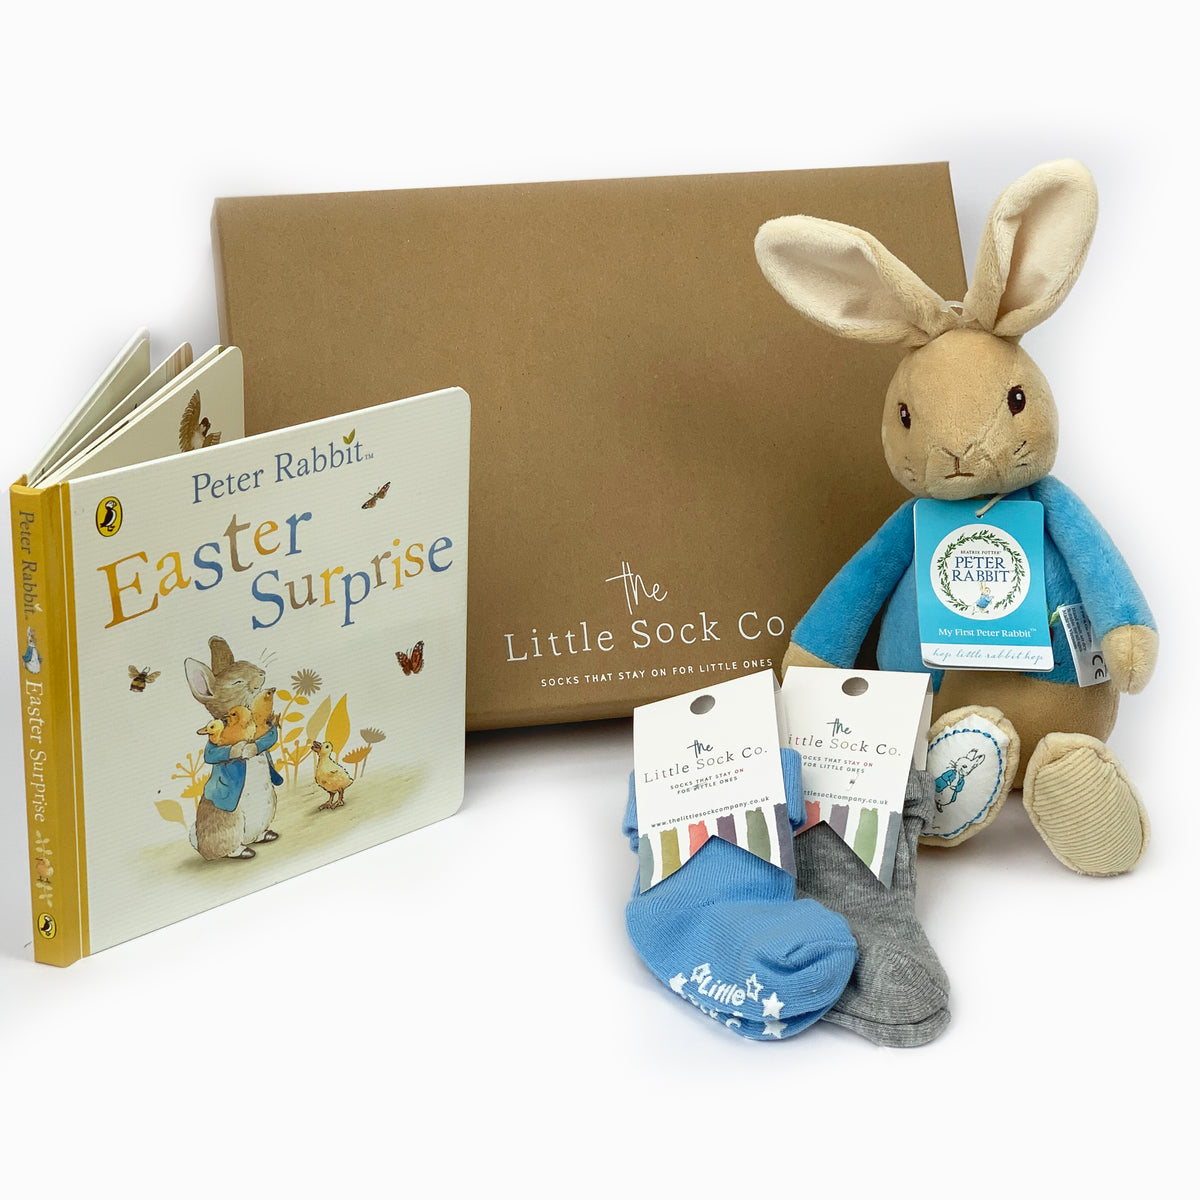 Classic Peter Rabbit Easter Surprise Baby and Toddler Gift Set - The perfect Chocolate Free Easter gift